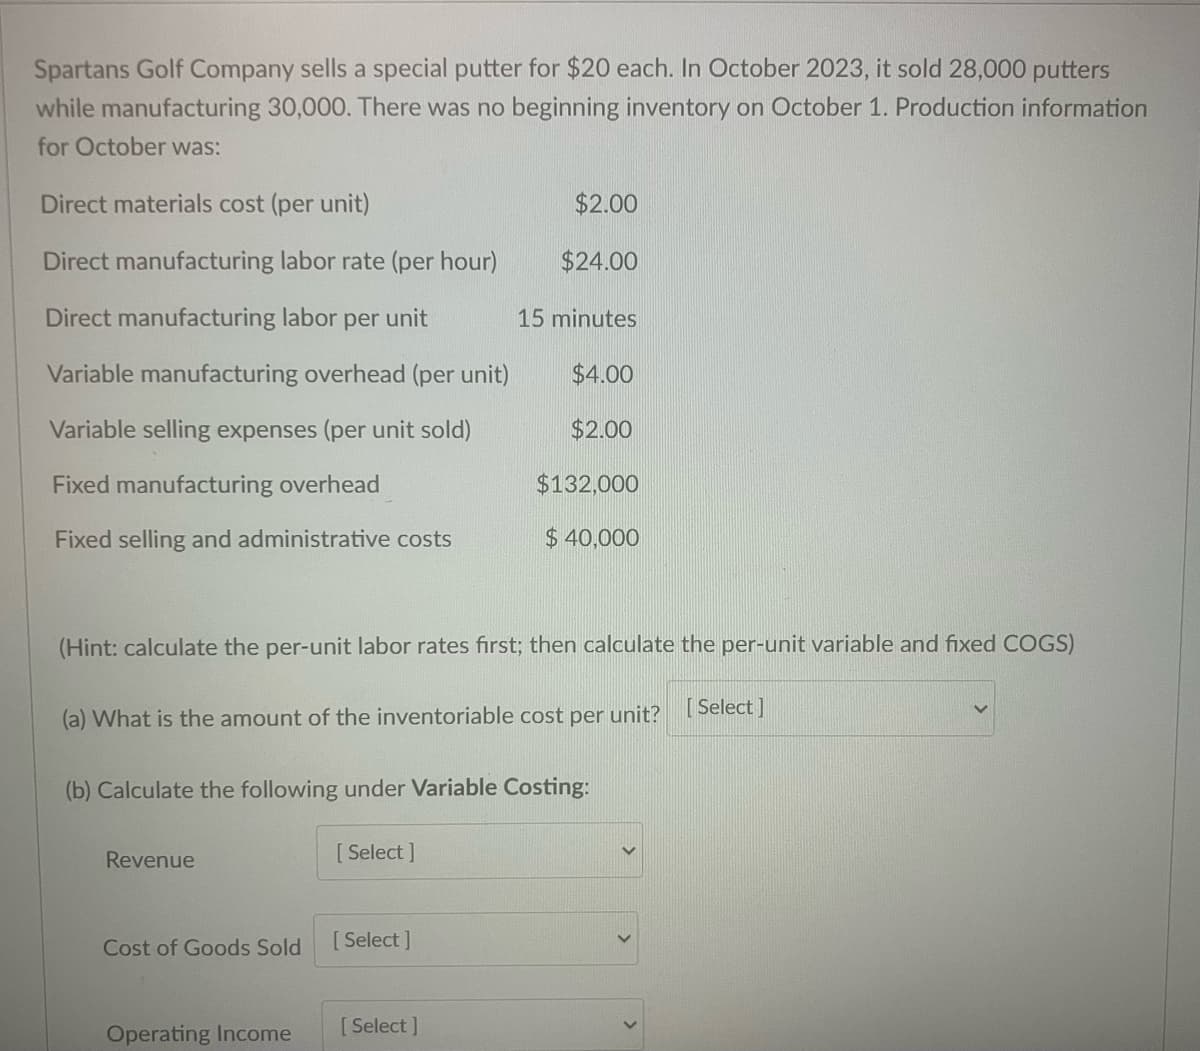 Spartans Golf Company sells a special putter for $20 each. In October 2023, it sold 28,000 putters
while manufacturing 30,000. There was no beginning inventory on October 1. Production information
for October was:
Direct materials cost (per unit)
Direct manufacturing labor rate (per hour)
$2.00
$24.00
Direct manufacturing labor per unit
15 minutes
Variable manufacturing overhead (per unit)
$4.00
Variable selling expenses (per unit sold)
$2.00
Fixed manufacturing overhead
$132,000
Fixed selling and administrative costs
$ 40,000
(Hint: calculate the per-unit labor rates first; then calculate the per-unit variable and fixed COGS)
(a) What is the amount of the inventoriable cost per unit?
[Select]
(b) Calculate the following under Variable Costing:
Revenue
[Select]
Cost of Goods Sold
[Select]
Operating Income
[Select]